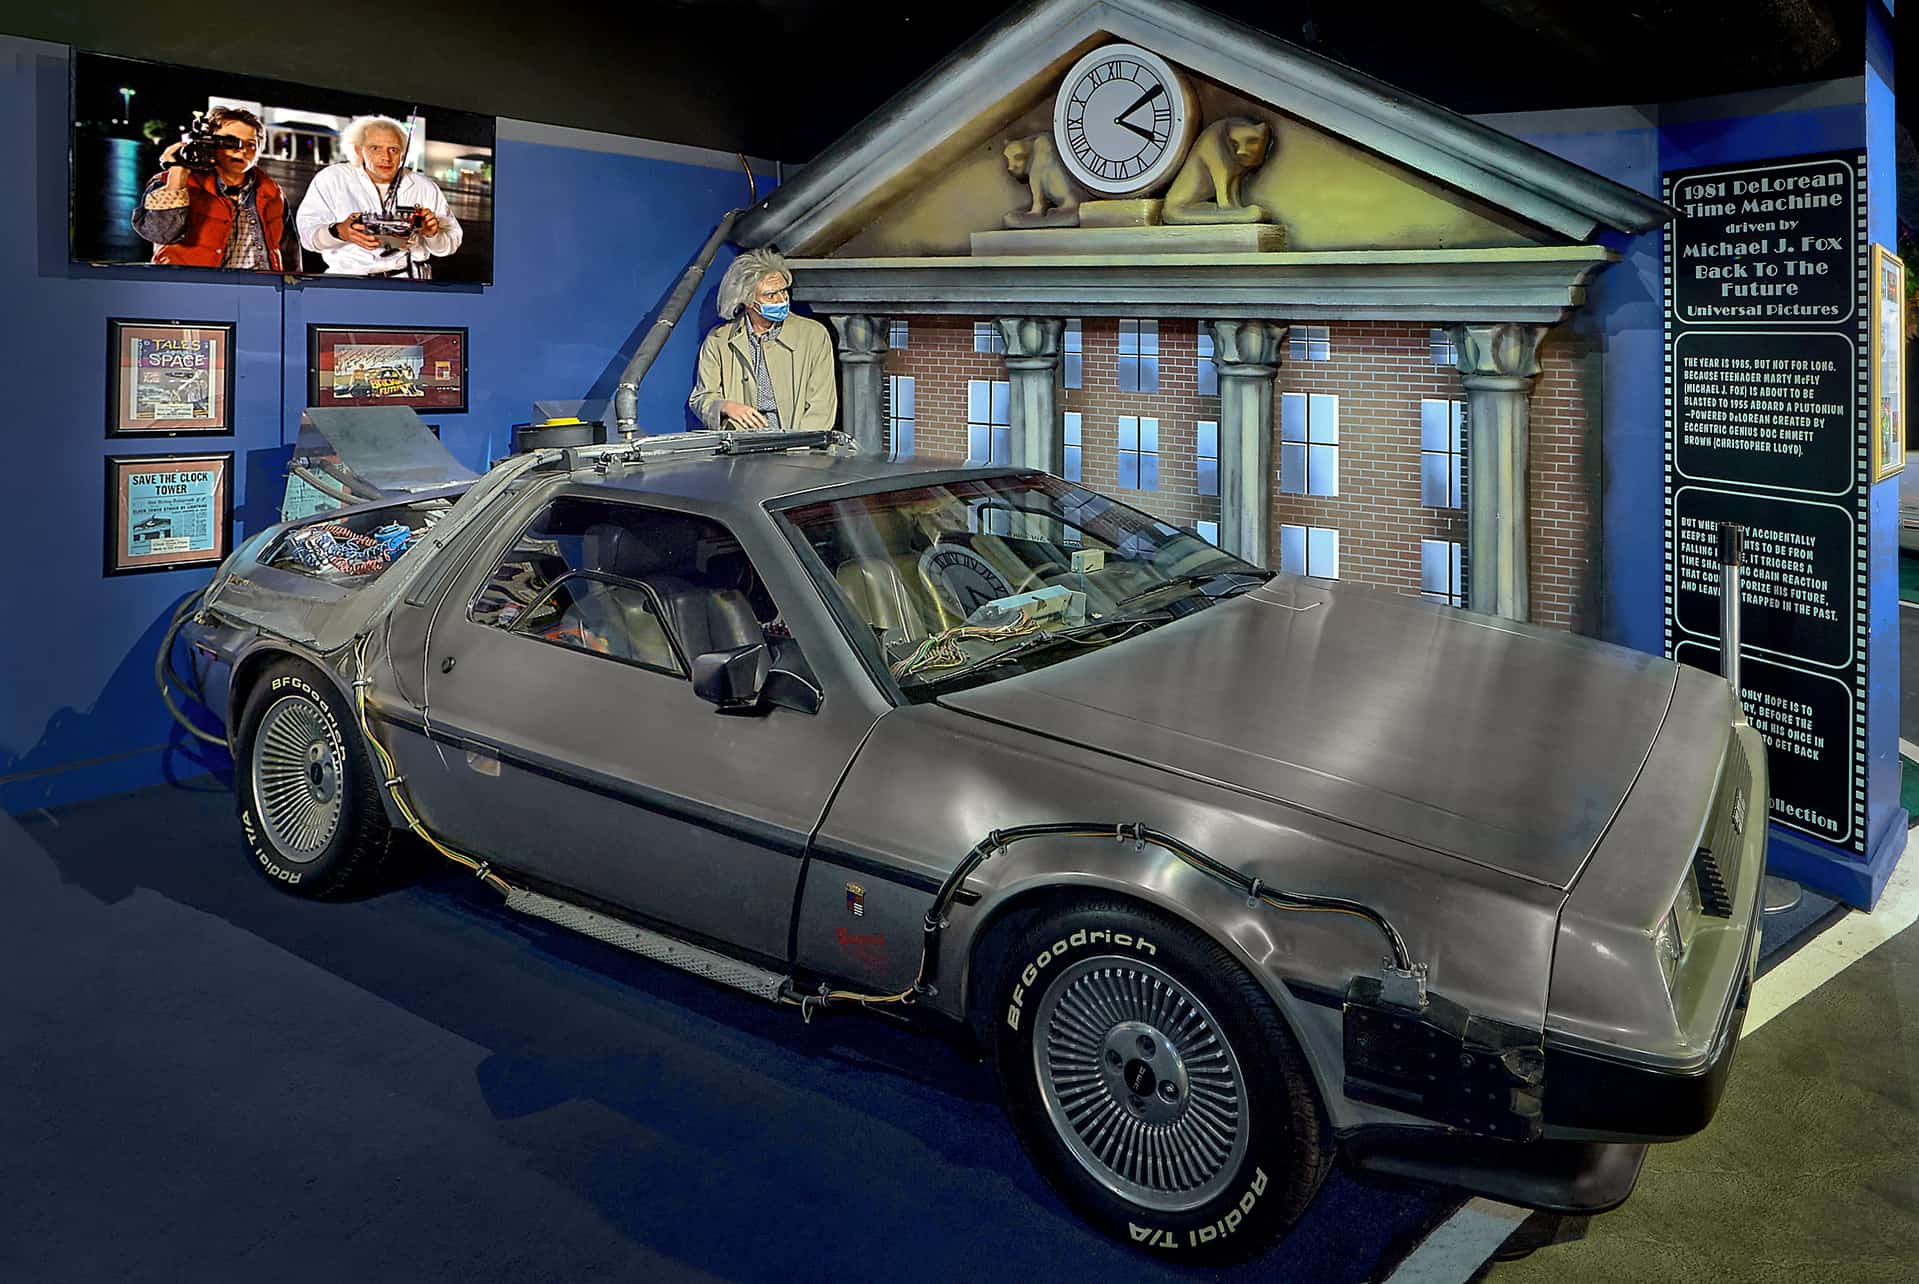 1981 Back to the Future car